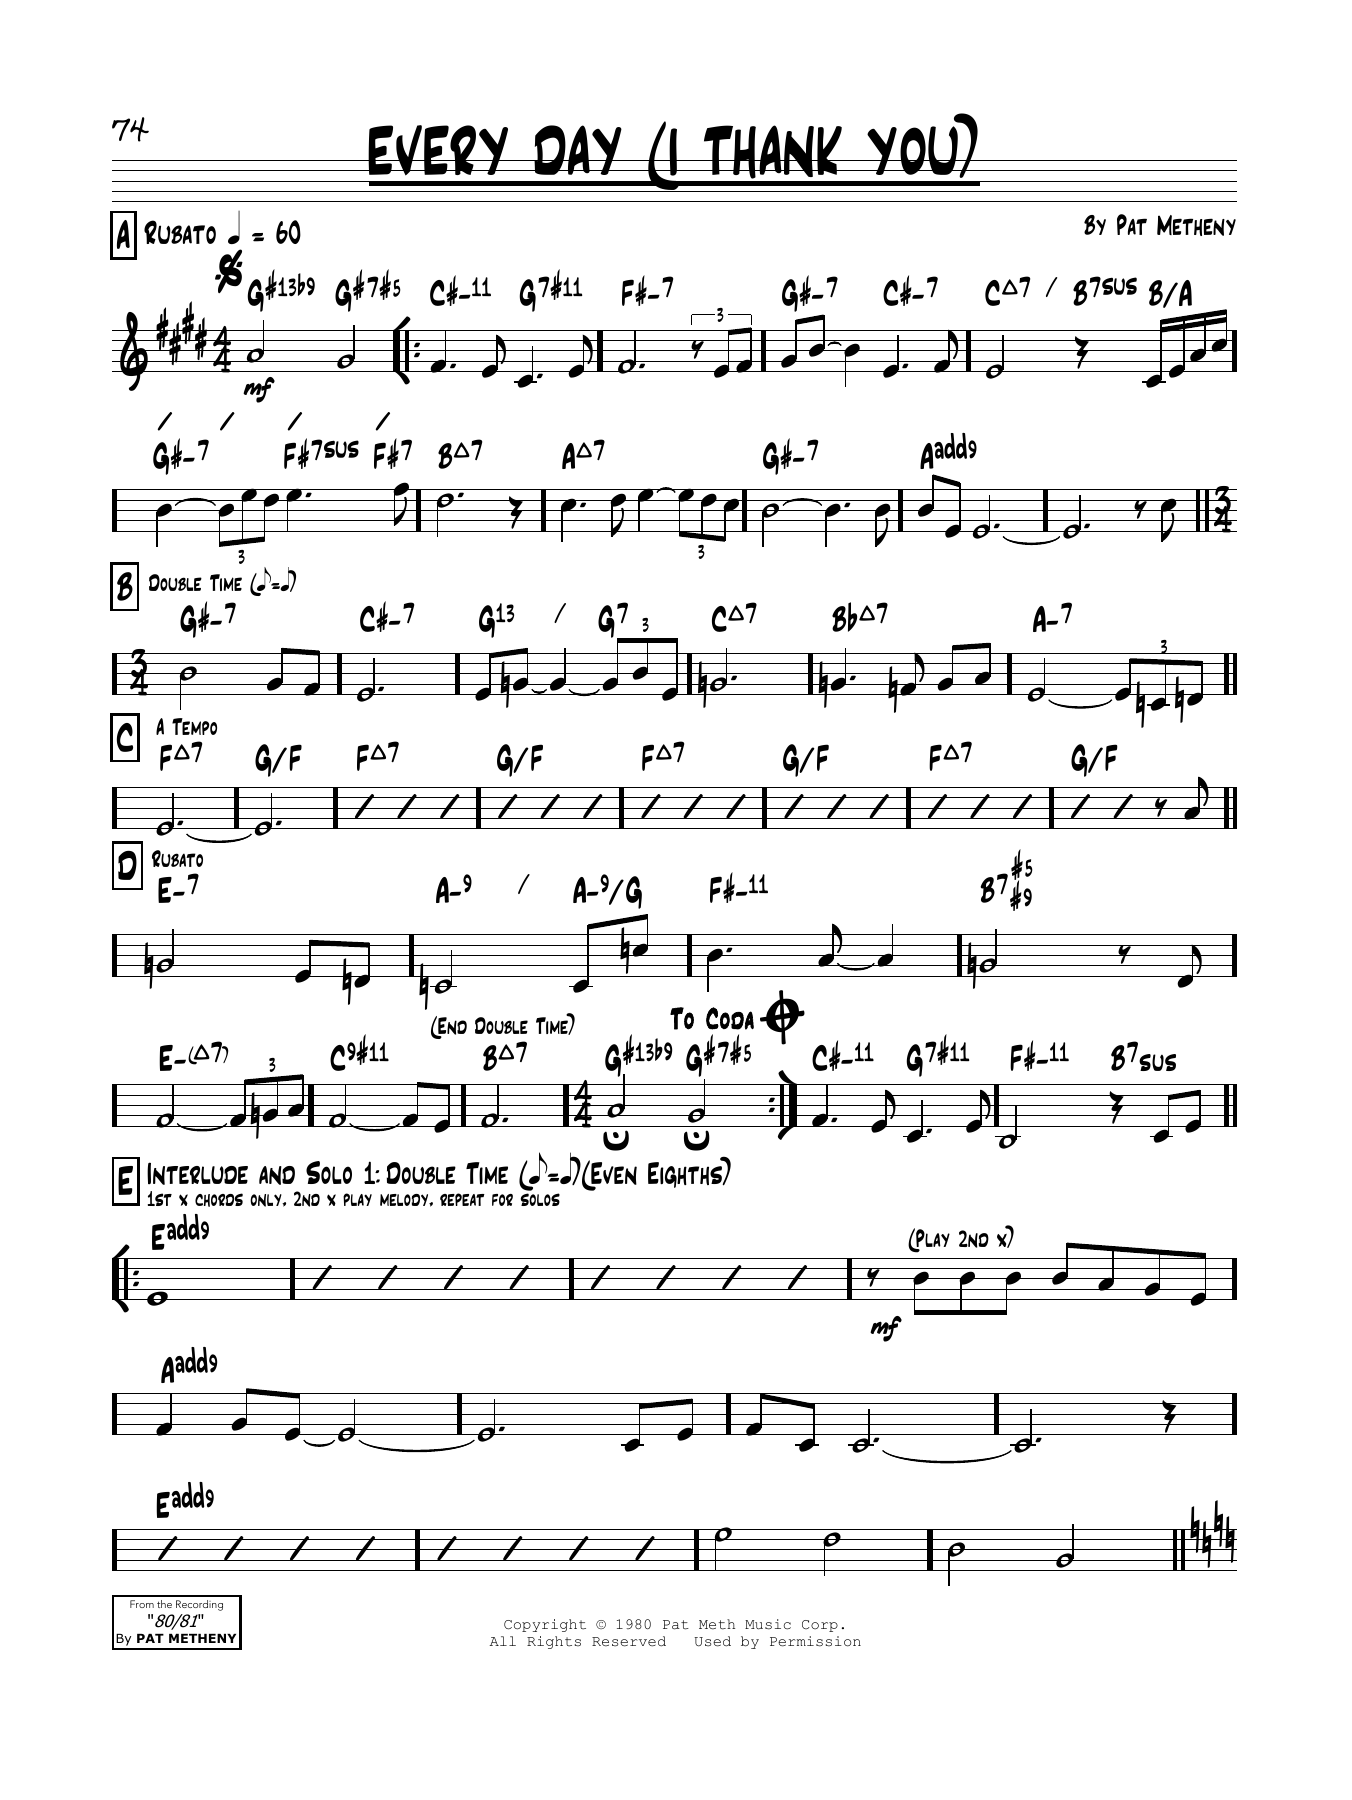 Download Pat Metheny Every Day (I Thank You) Sheet Music